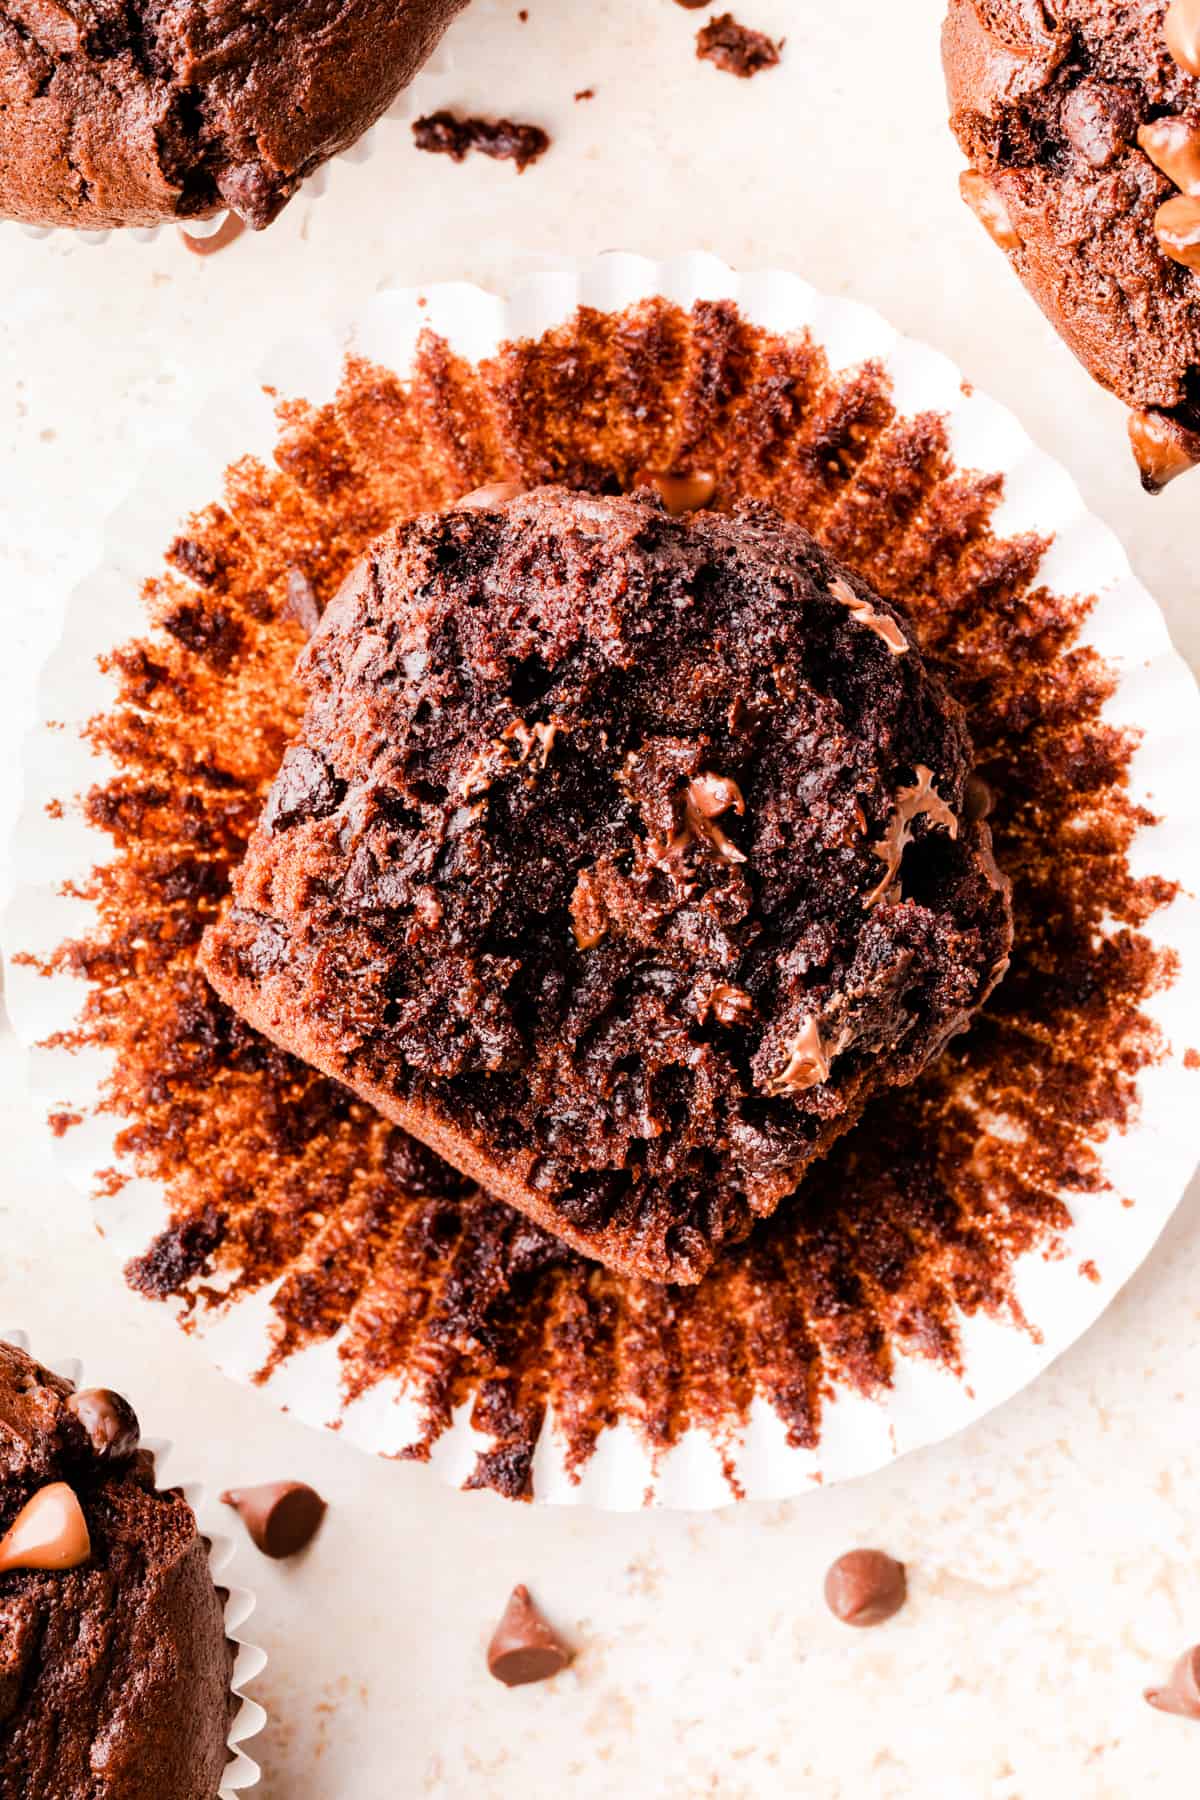 double choc muffin with bite missing revealing moist crumb.